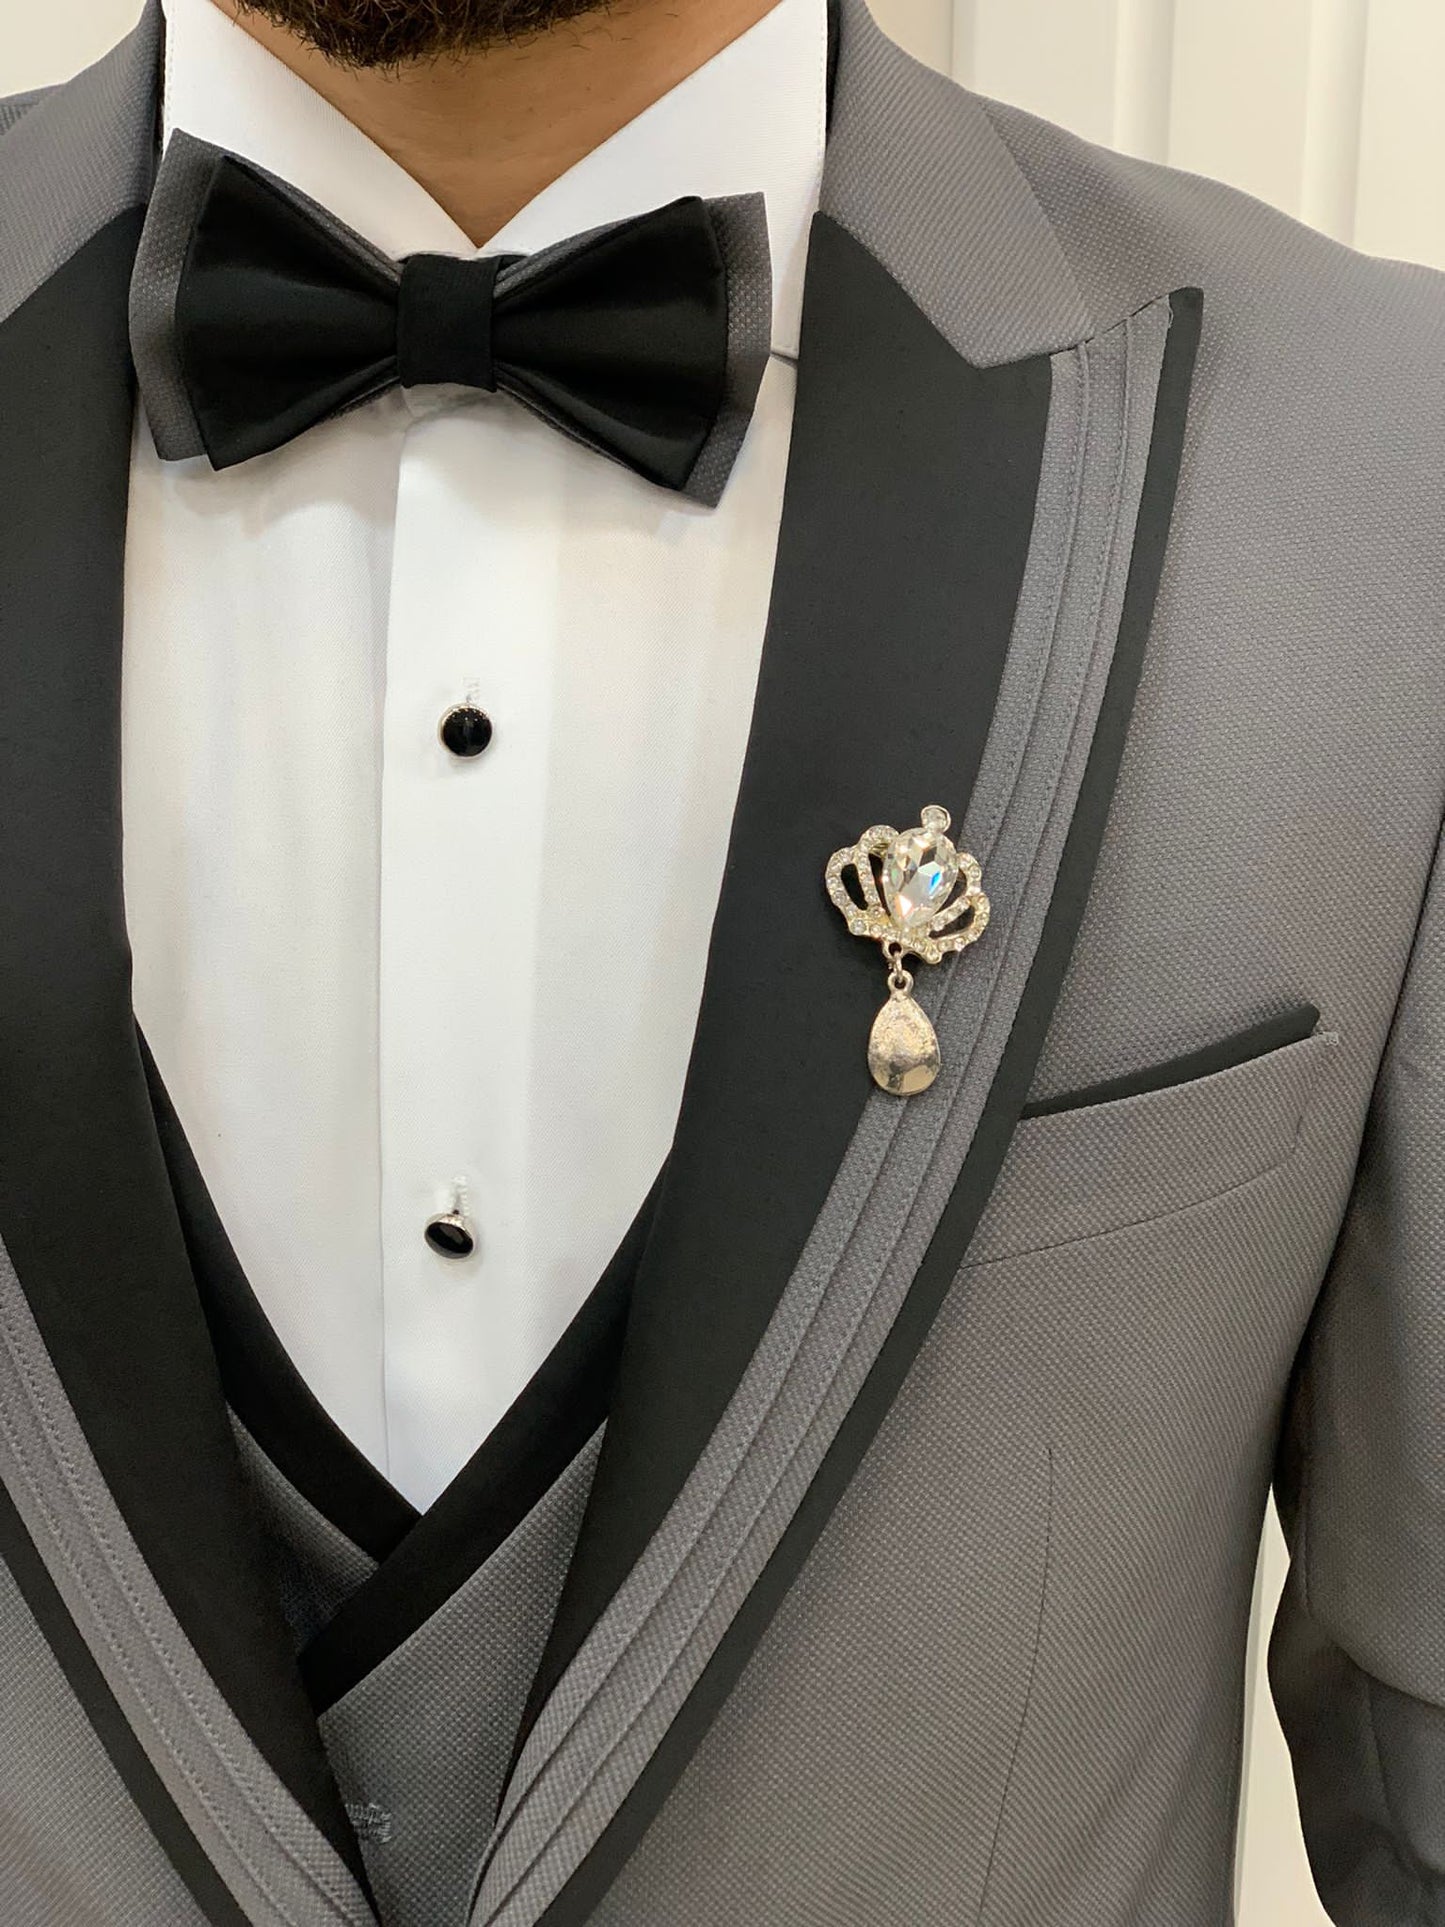 Model Wearing Gray Tuxedo with Black and Gray Patterned Peak Lapel, Single Button, Double Slit, Slim-Fit Italian Cut at a showroom